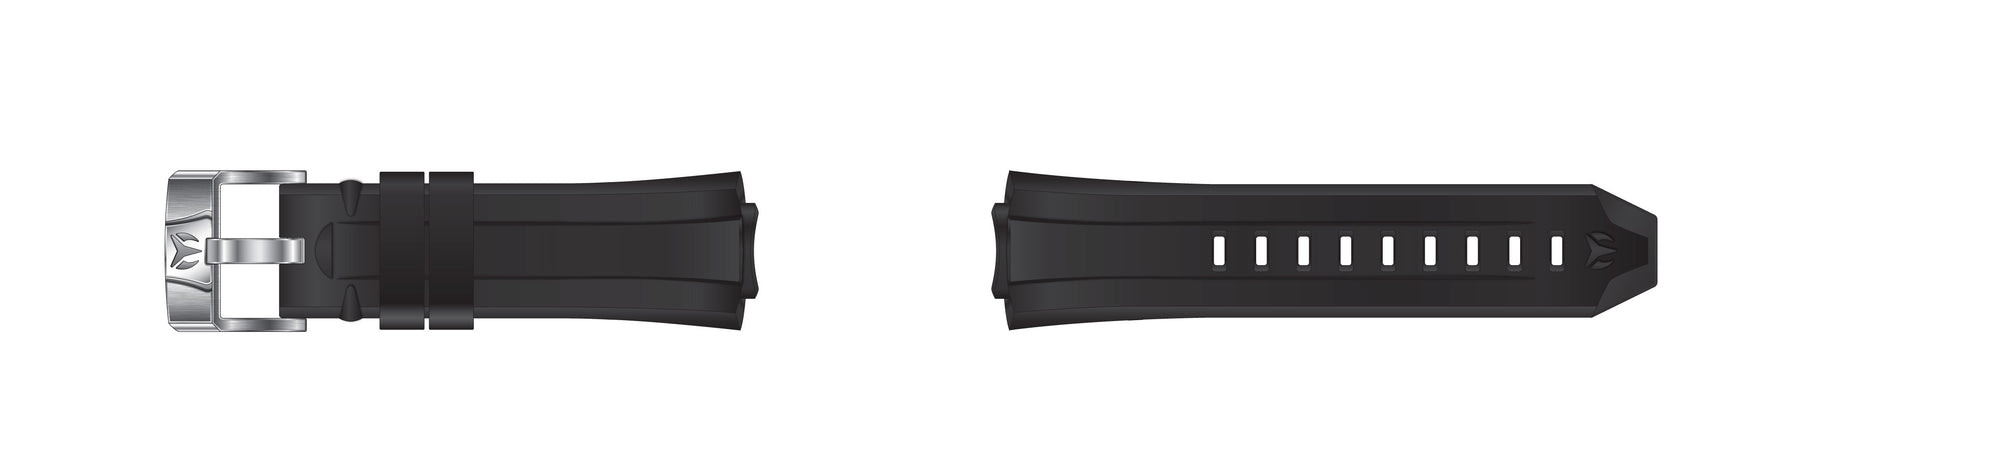 Band for California / Cruise Collection Black TM-S-1-048